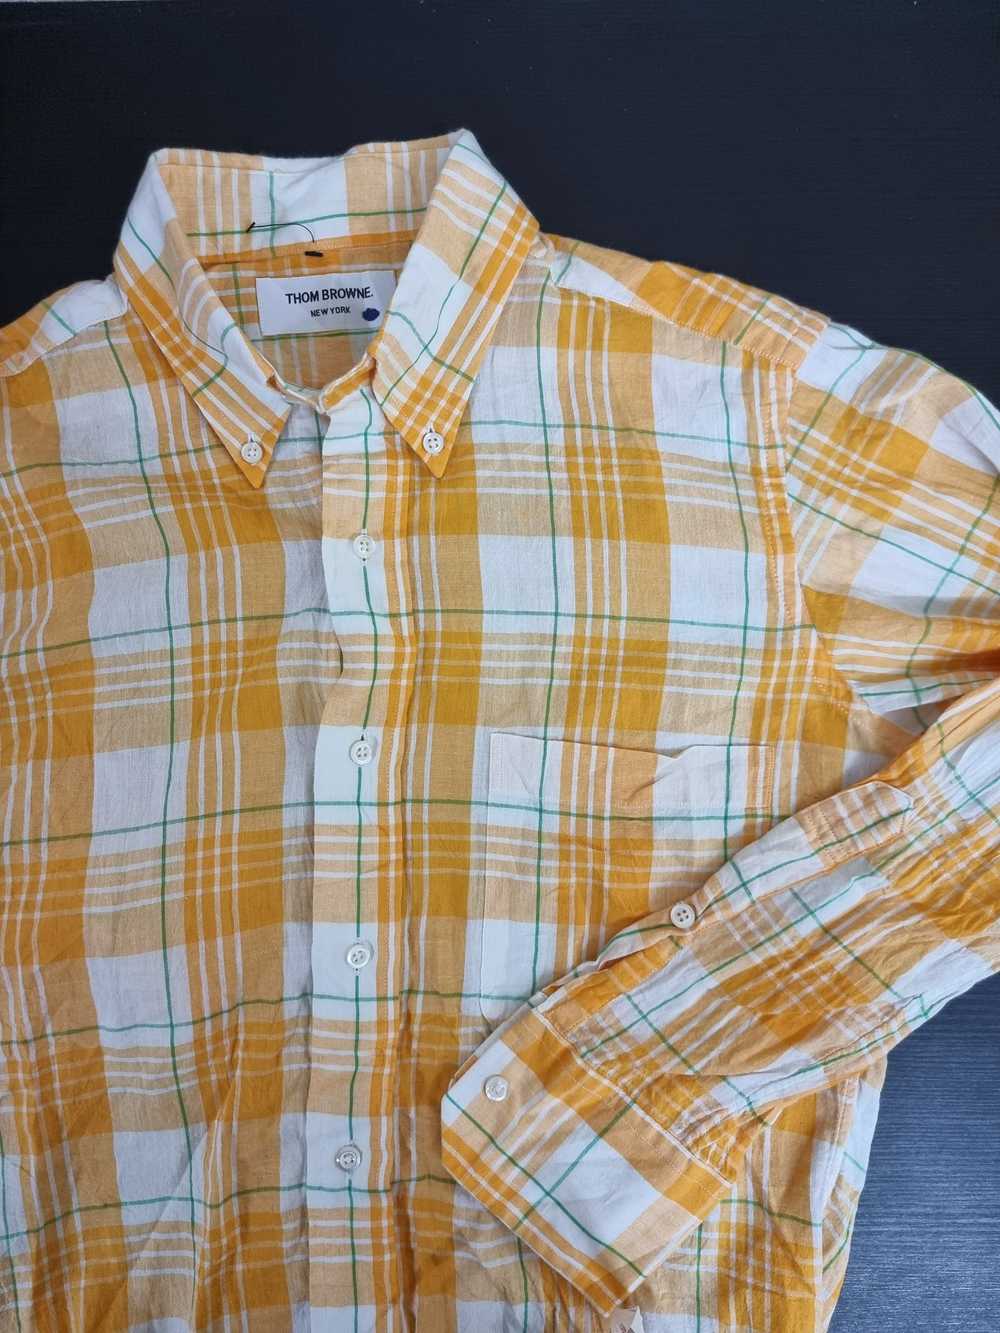 Thom Browne yellow cotton plaid button up shirt - image 4